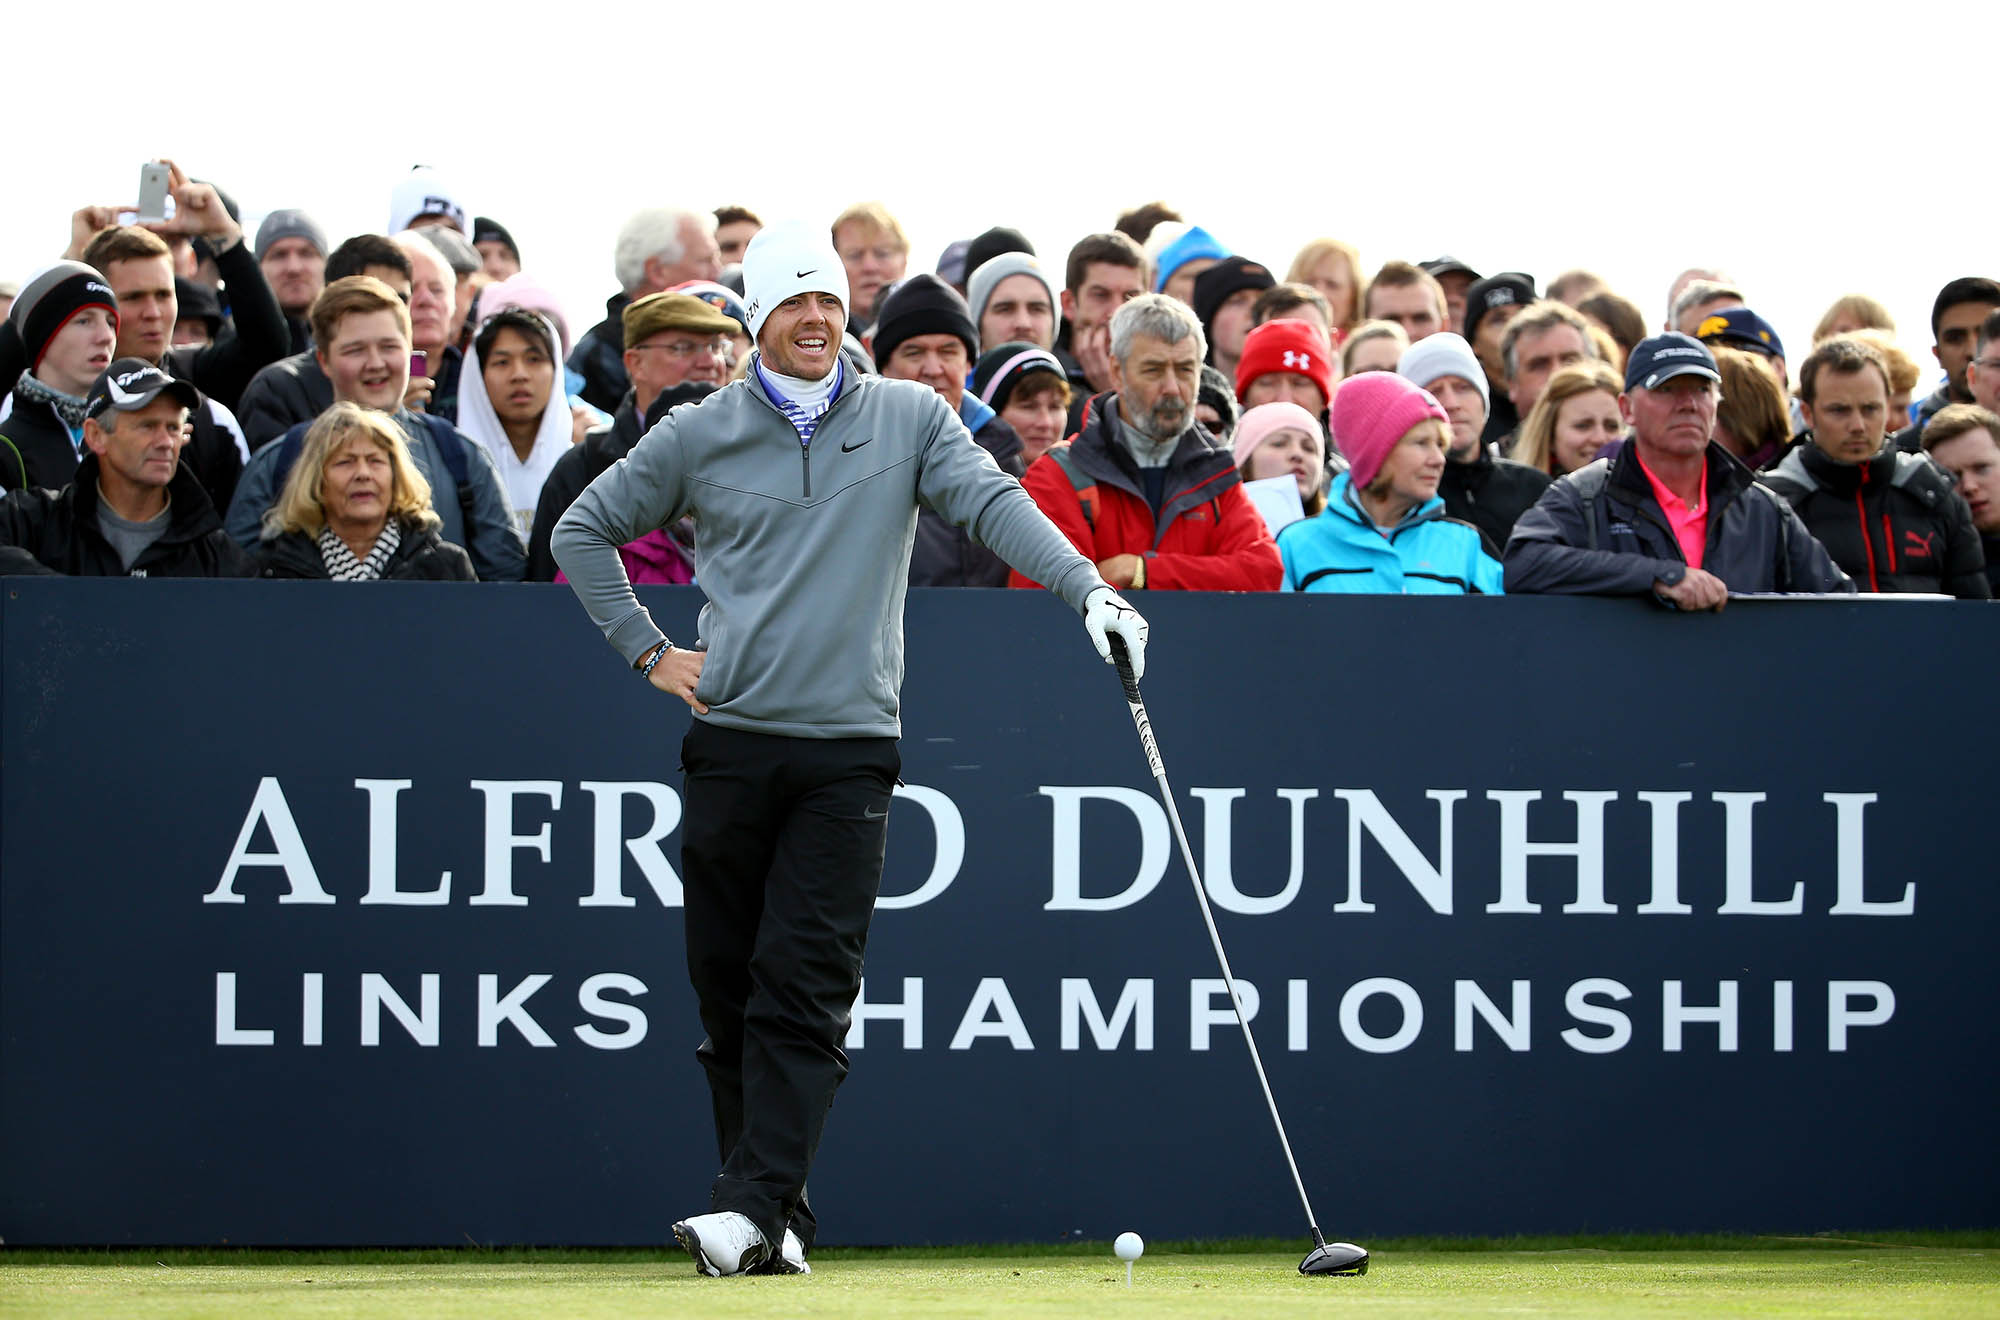 Here's the difference between the Alfred Dunhill Championship and the